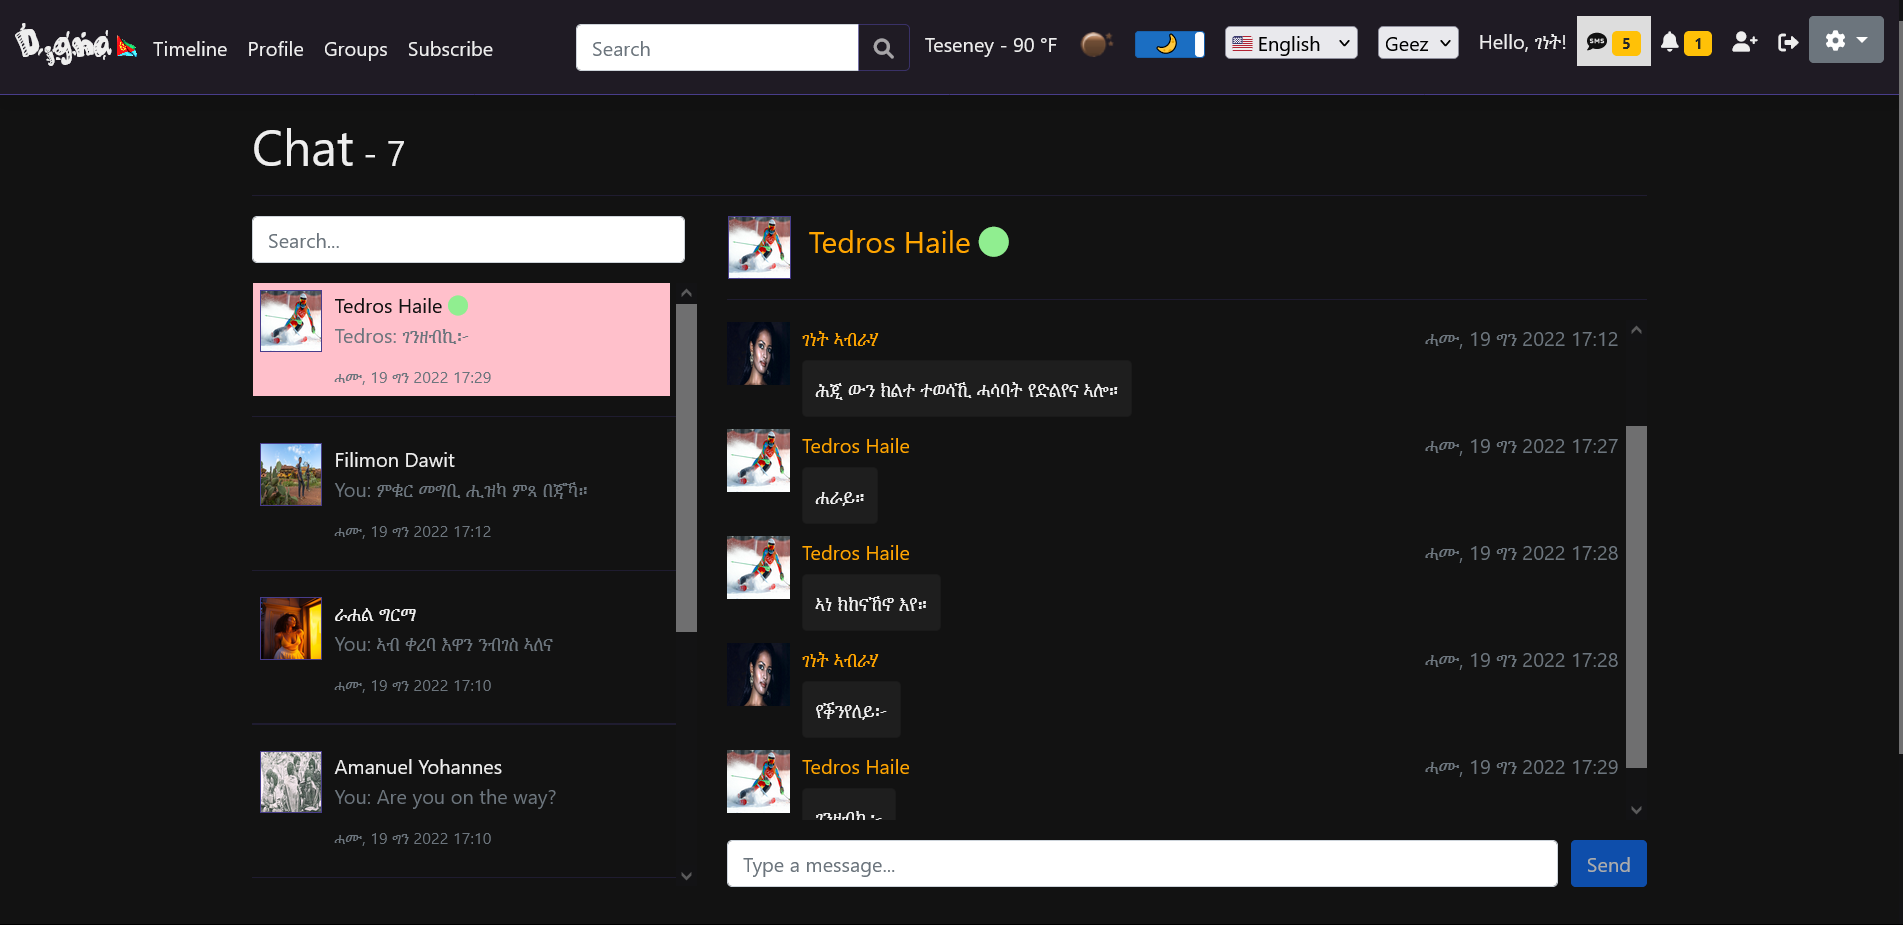 Another things you can do on DJGNA is chat with your friends, family, and any other connections you happen to make on the platform